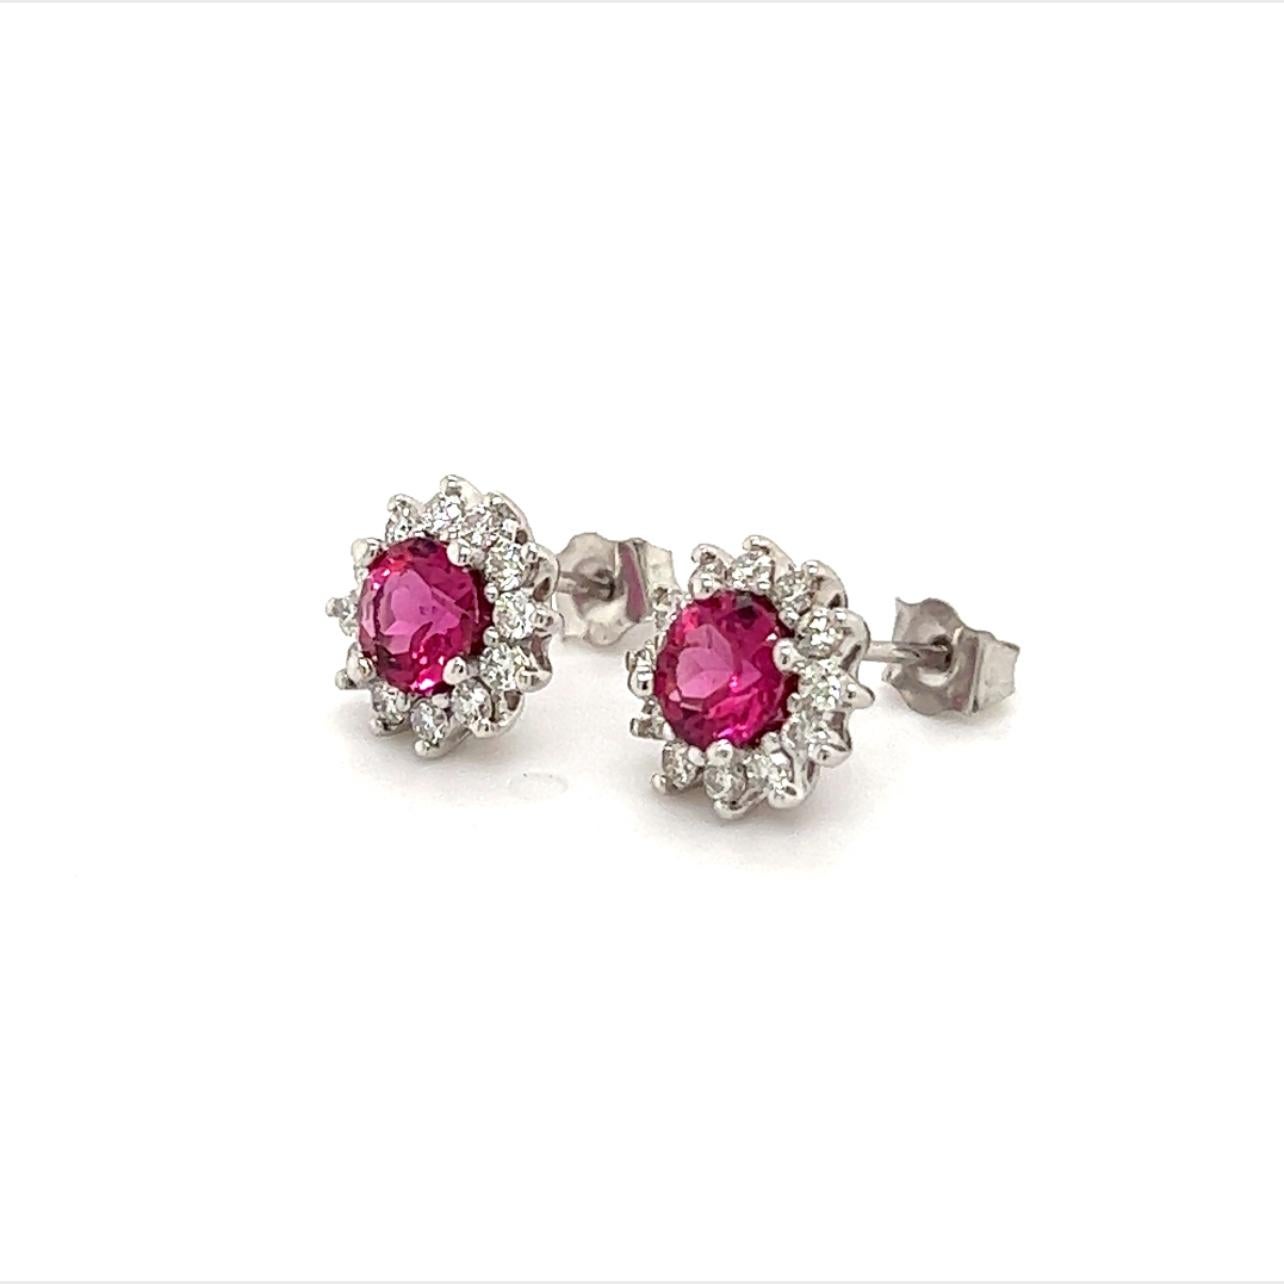 Natural Finely Faceted Quality Rubellite Tourmaline Diamond Earrings 14k Gold 1.36 TCW Certified $3,950 211348

This is a Unique Custom Made Glamorous Piece of Jewelry!

Nothing says, “I Love you” more than Diamonds and Pearls!

These Rubellite